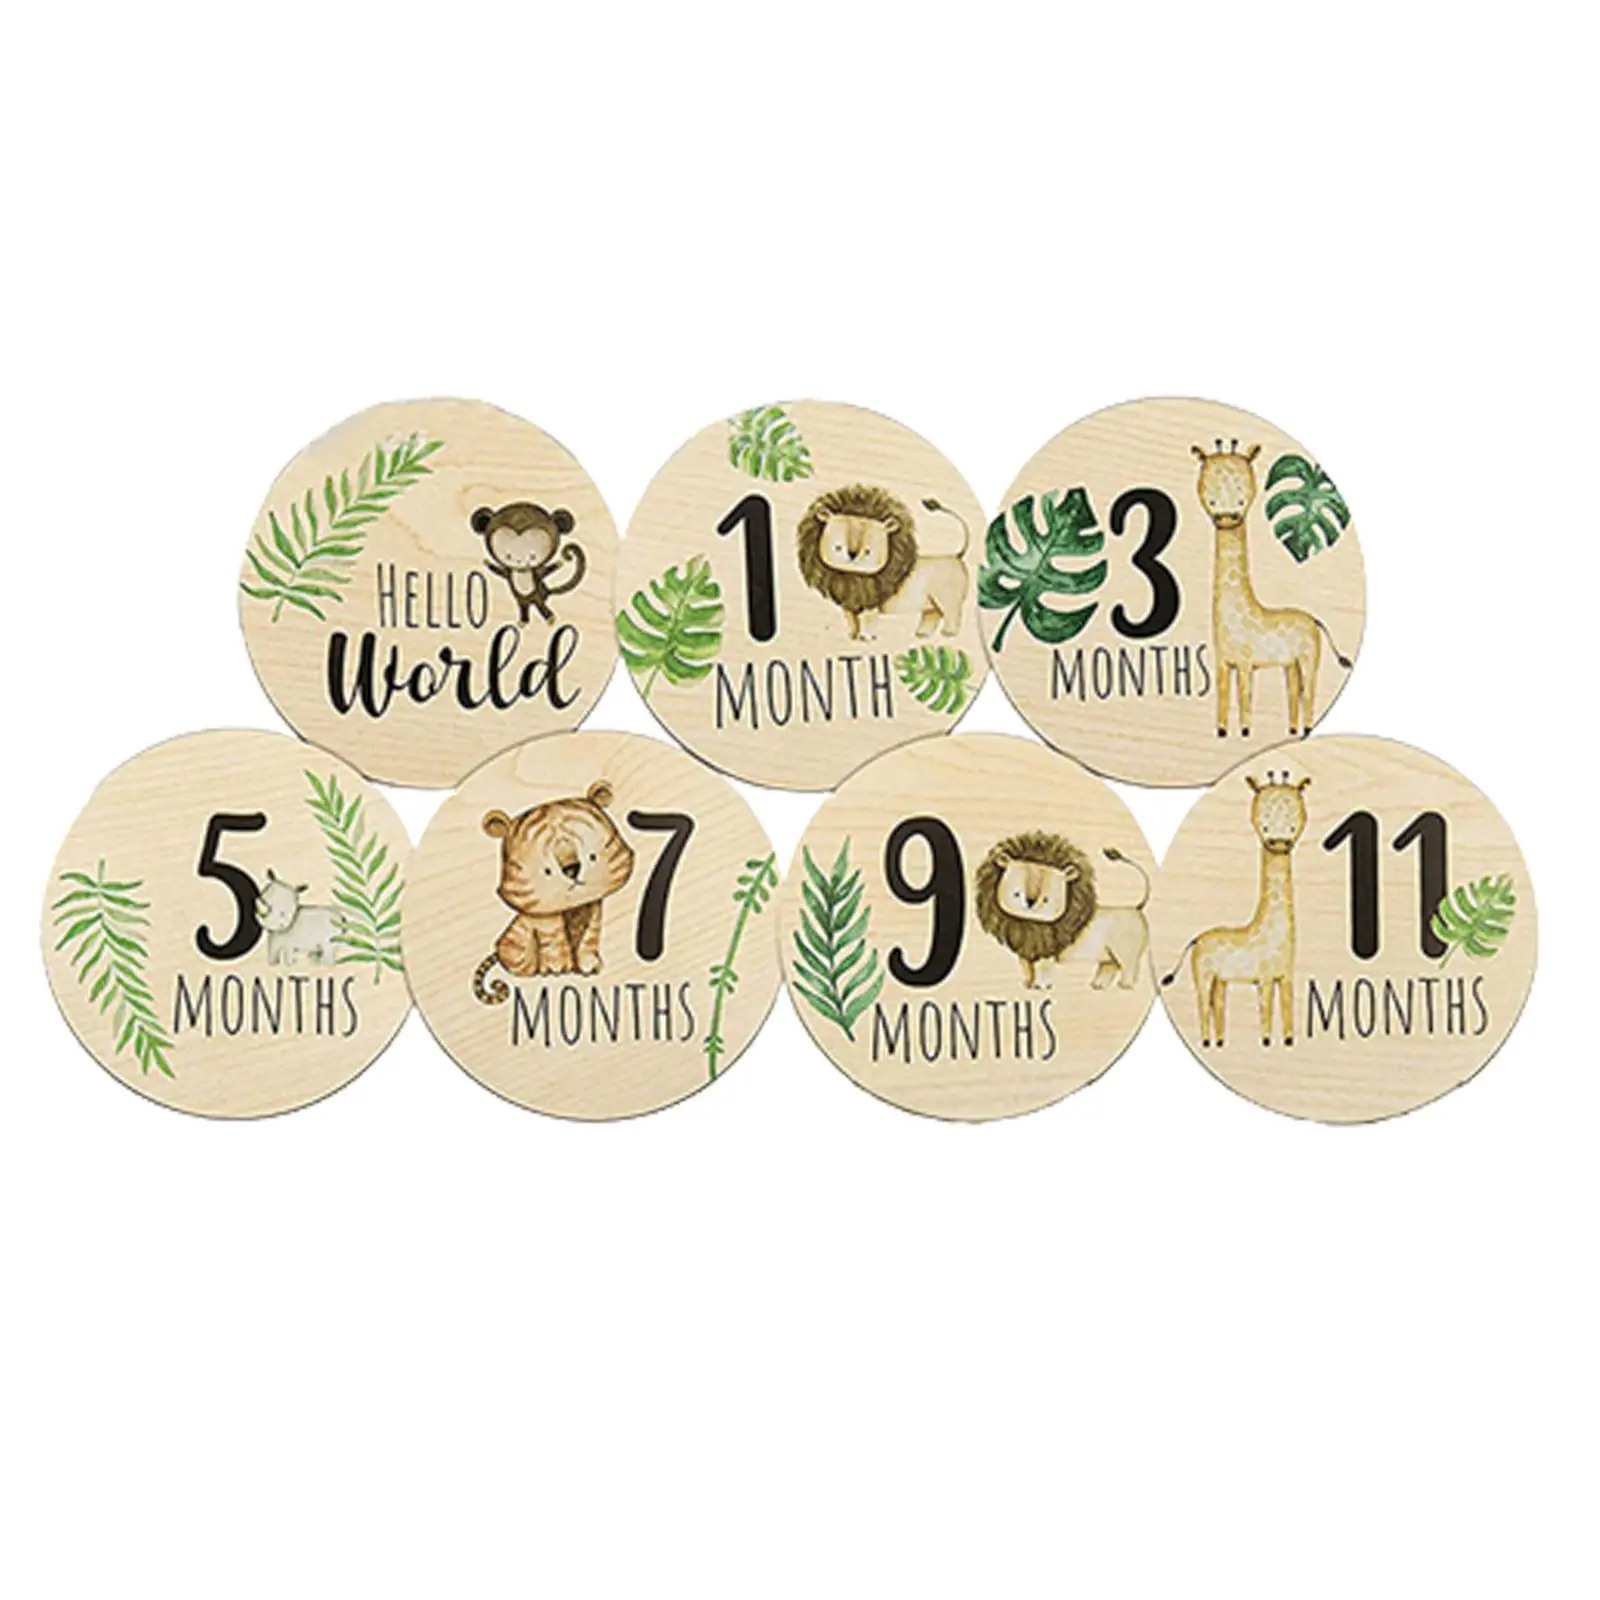 7x Wooden Baby Milestone Cards Discs for Newborn Photo Props Baby Growth